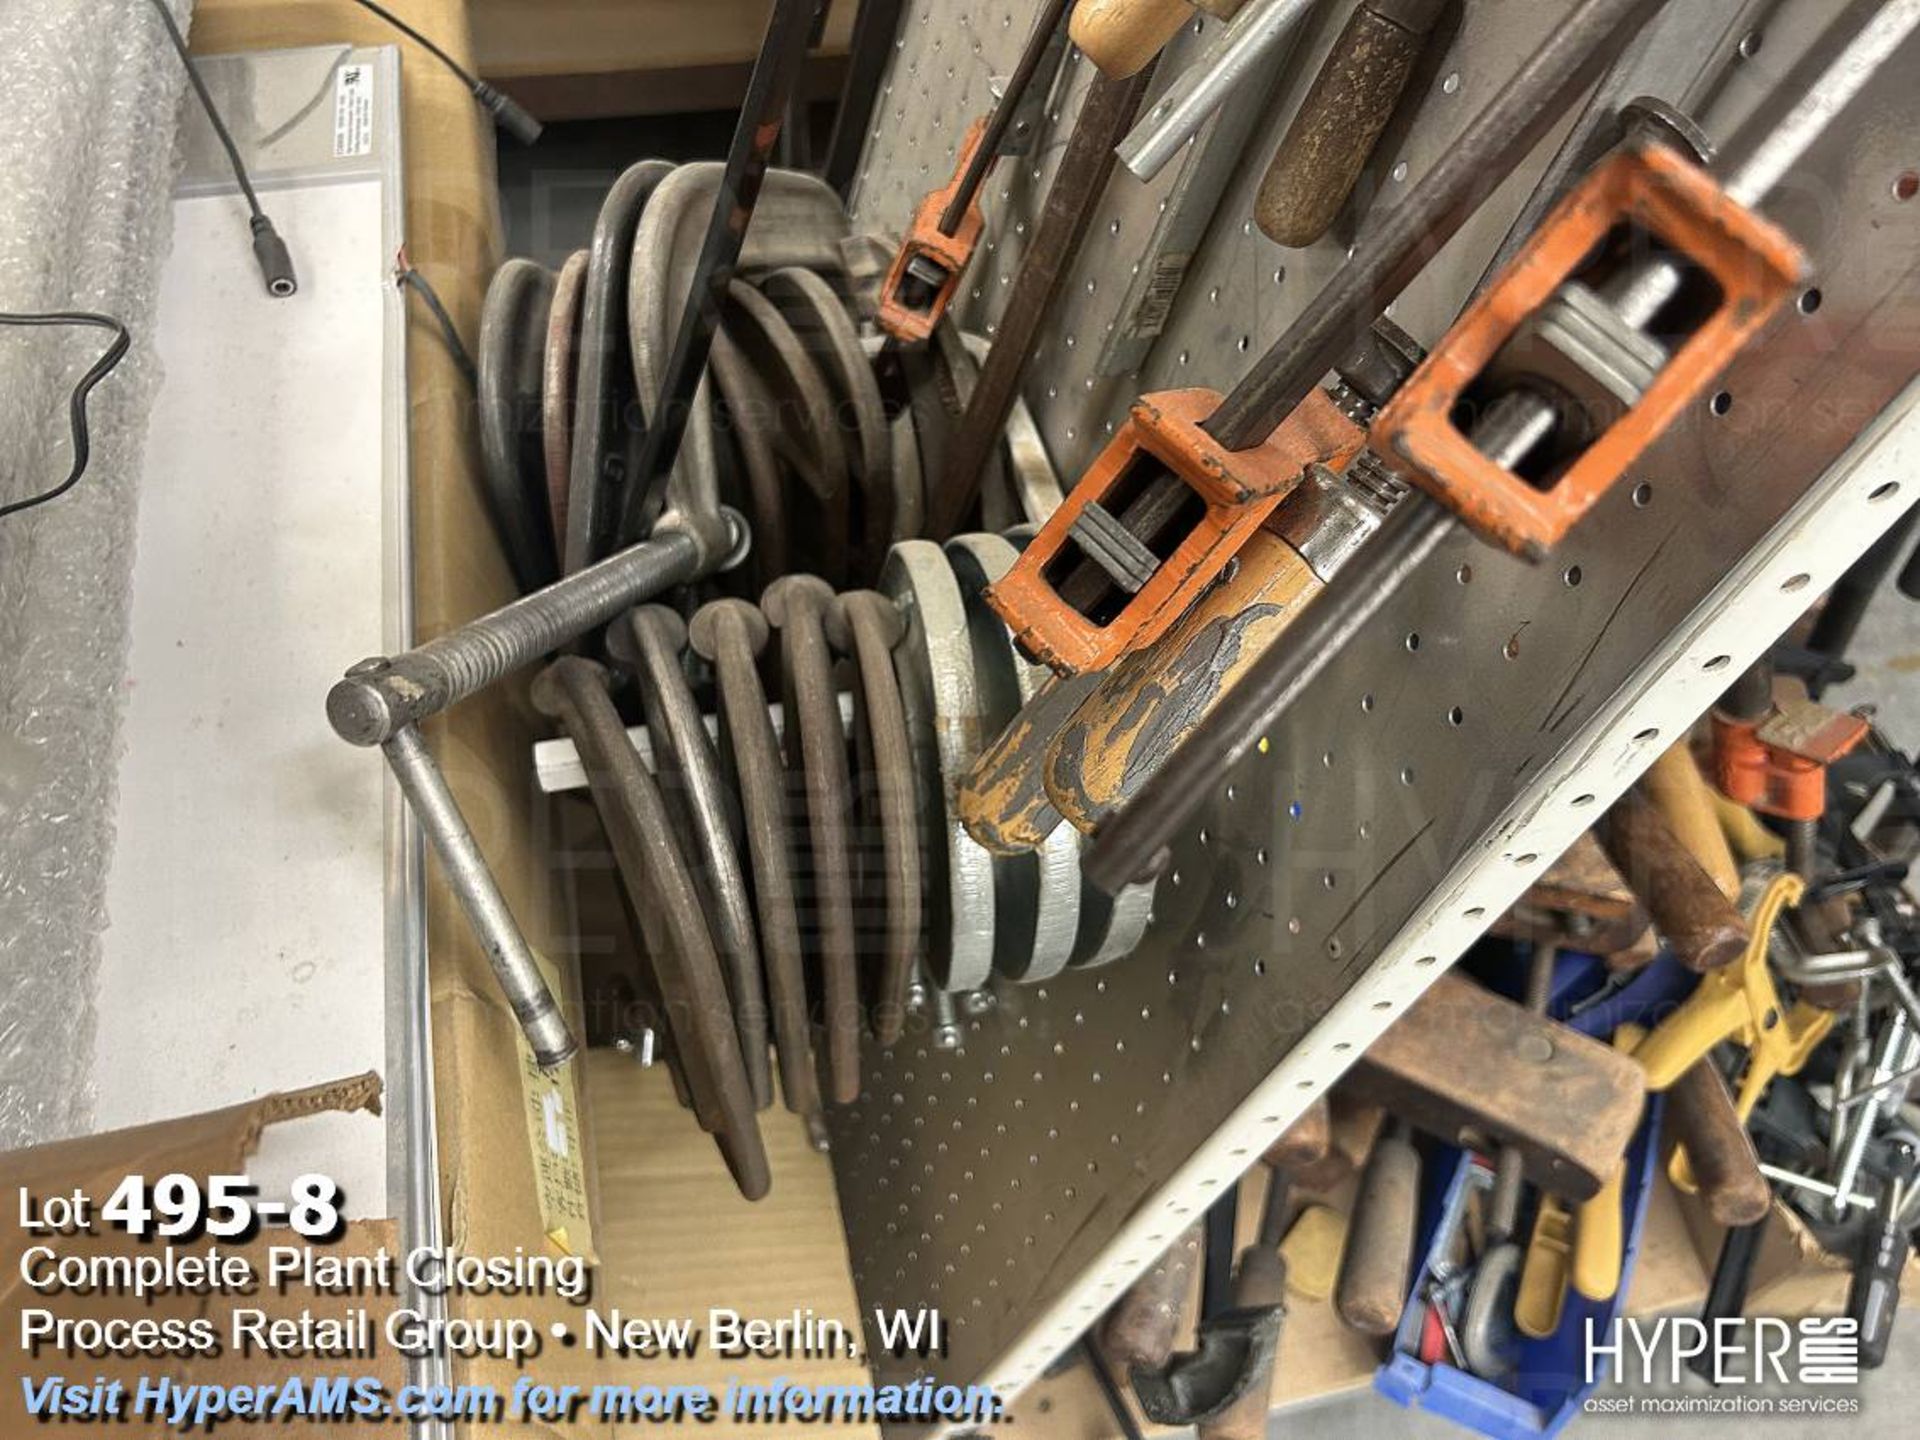 Wood clamps, c-clamps, and rack - Image 8 of 8